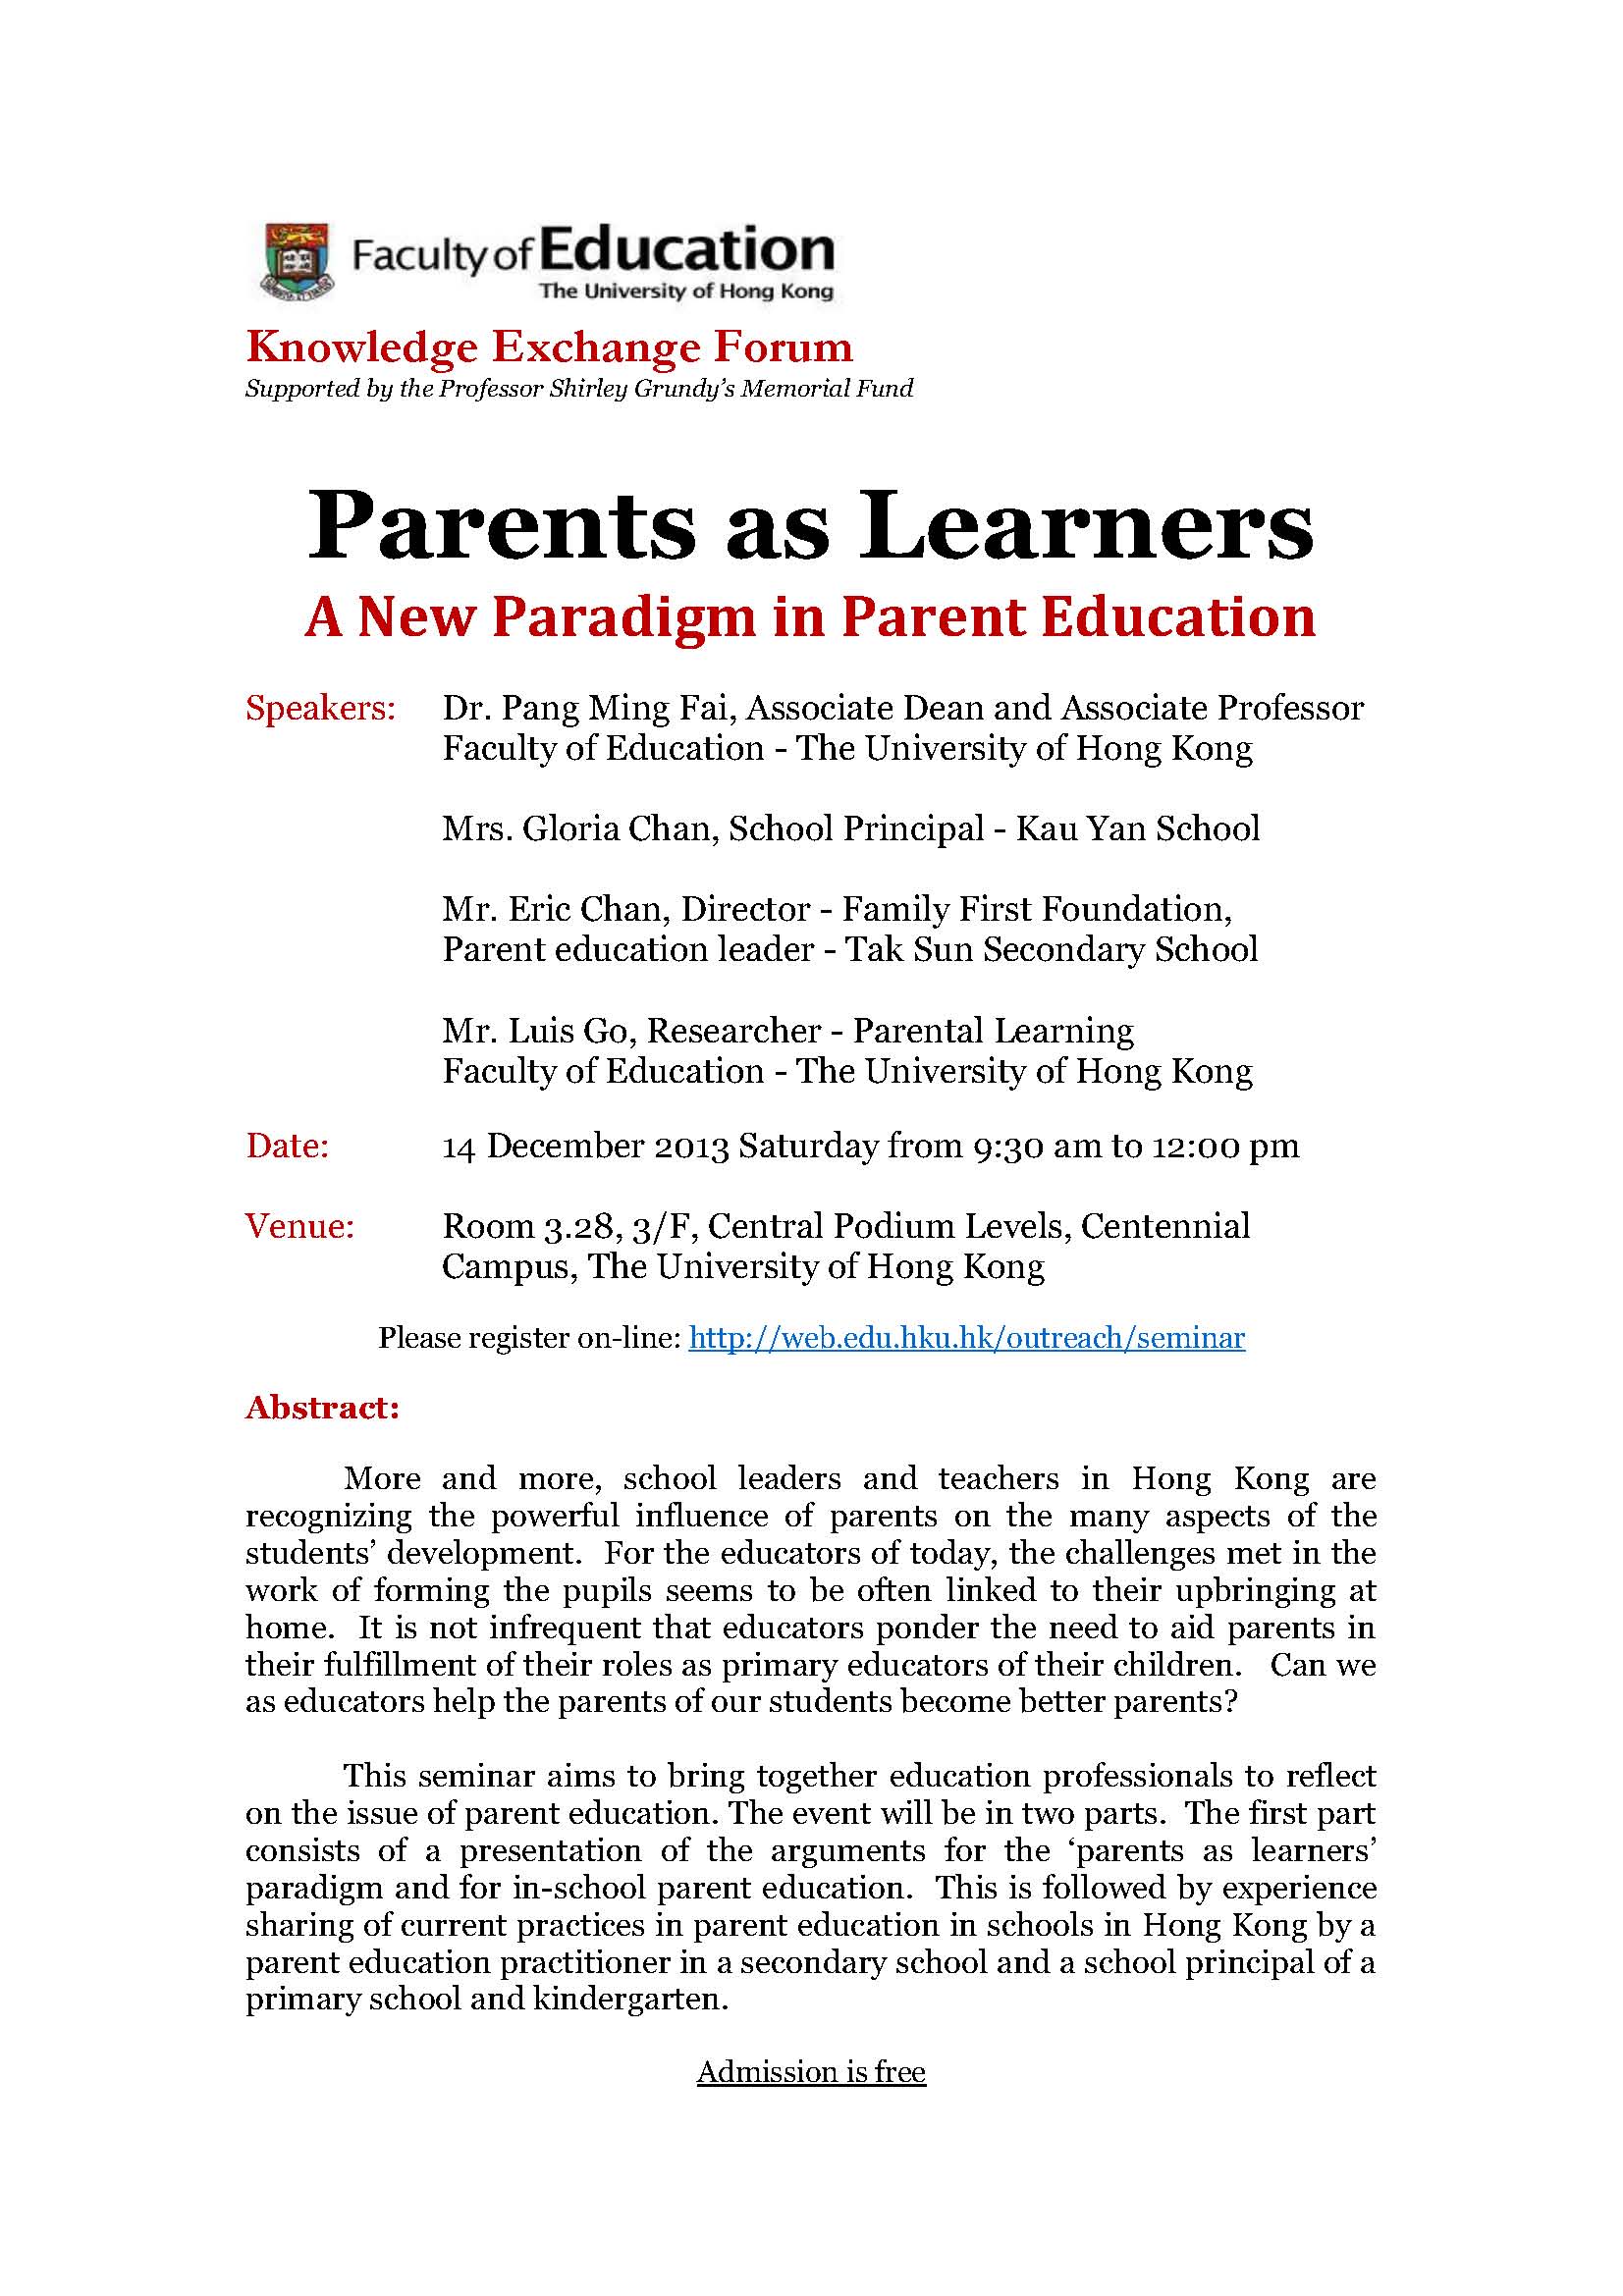 Parents as learners: A new paradigm in parent education